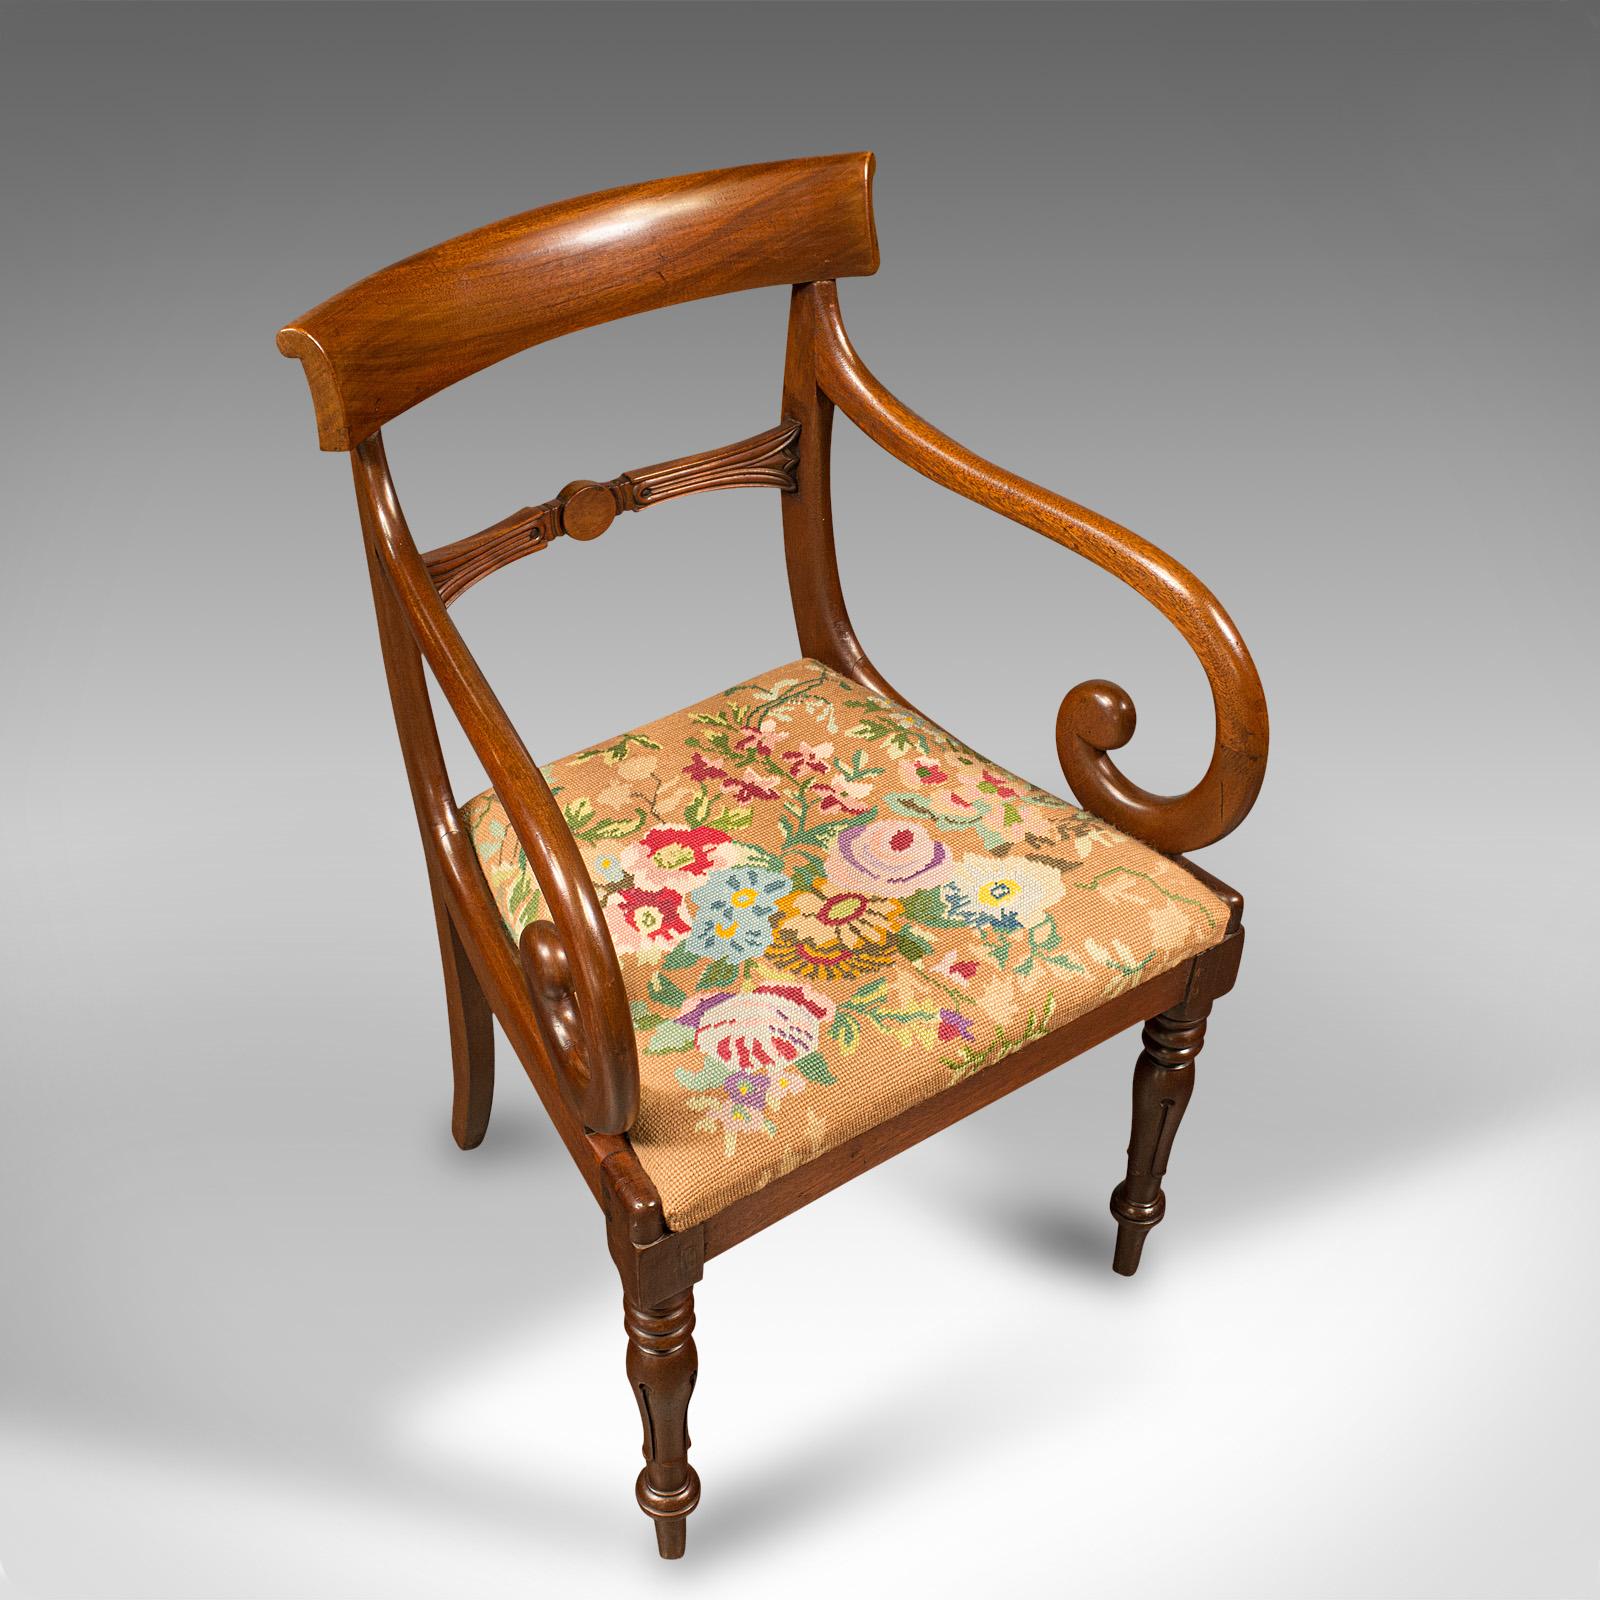 Wood Antique Scroll Arm Chair, English, Armchair, Desk, Needlepoint, Regency, C.1830 For Sale